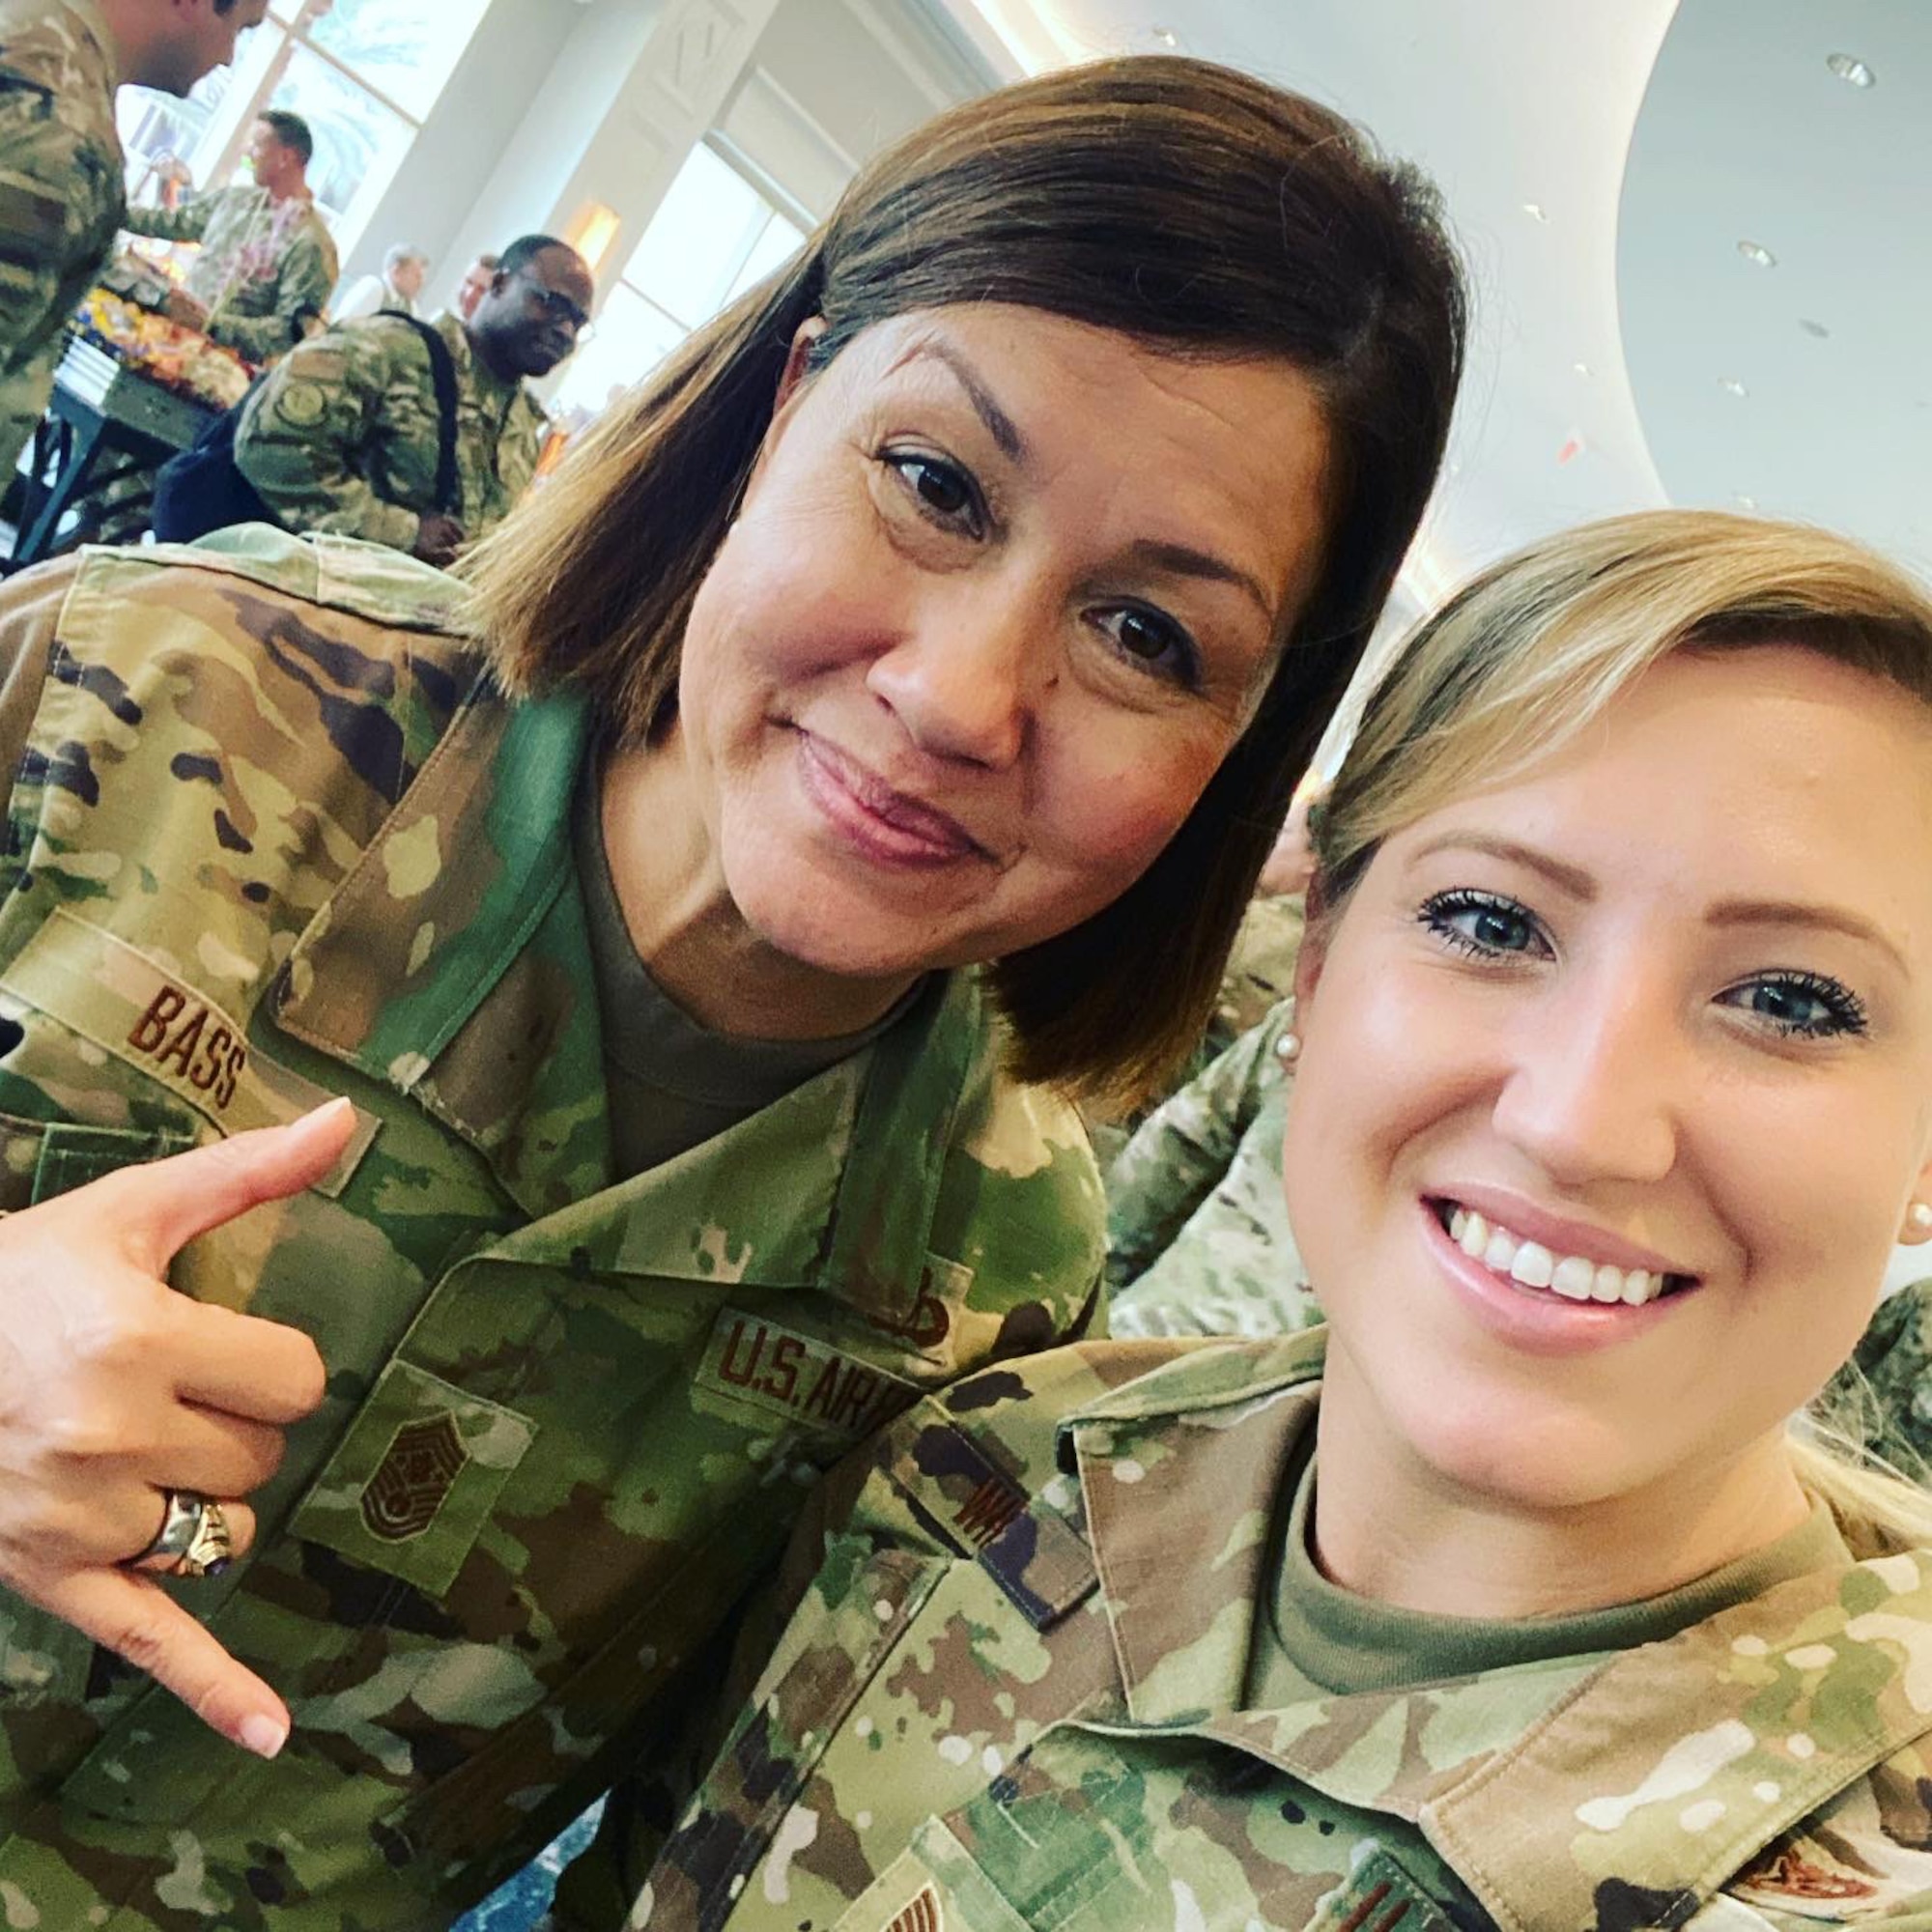 Tech. Sgt. Jaymie White takes a selfie with Command Chief Master Sgt. of the Air Force JoAnne S. Bass, 19th CMSAF, at the Air Force Sergeants Association Professional Education and Development Symposium July 28, 2021, in Orlando Florida.  During the symposium the 104th Fighter Wing members met with Air Force senior enlisted leaders and discussed ways that the Air and Space Forces plan to accelerate change.  (U.S. Air National Guard courtesy photo)